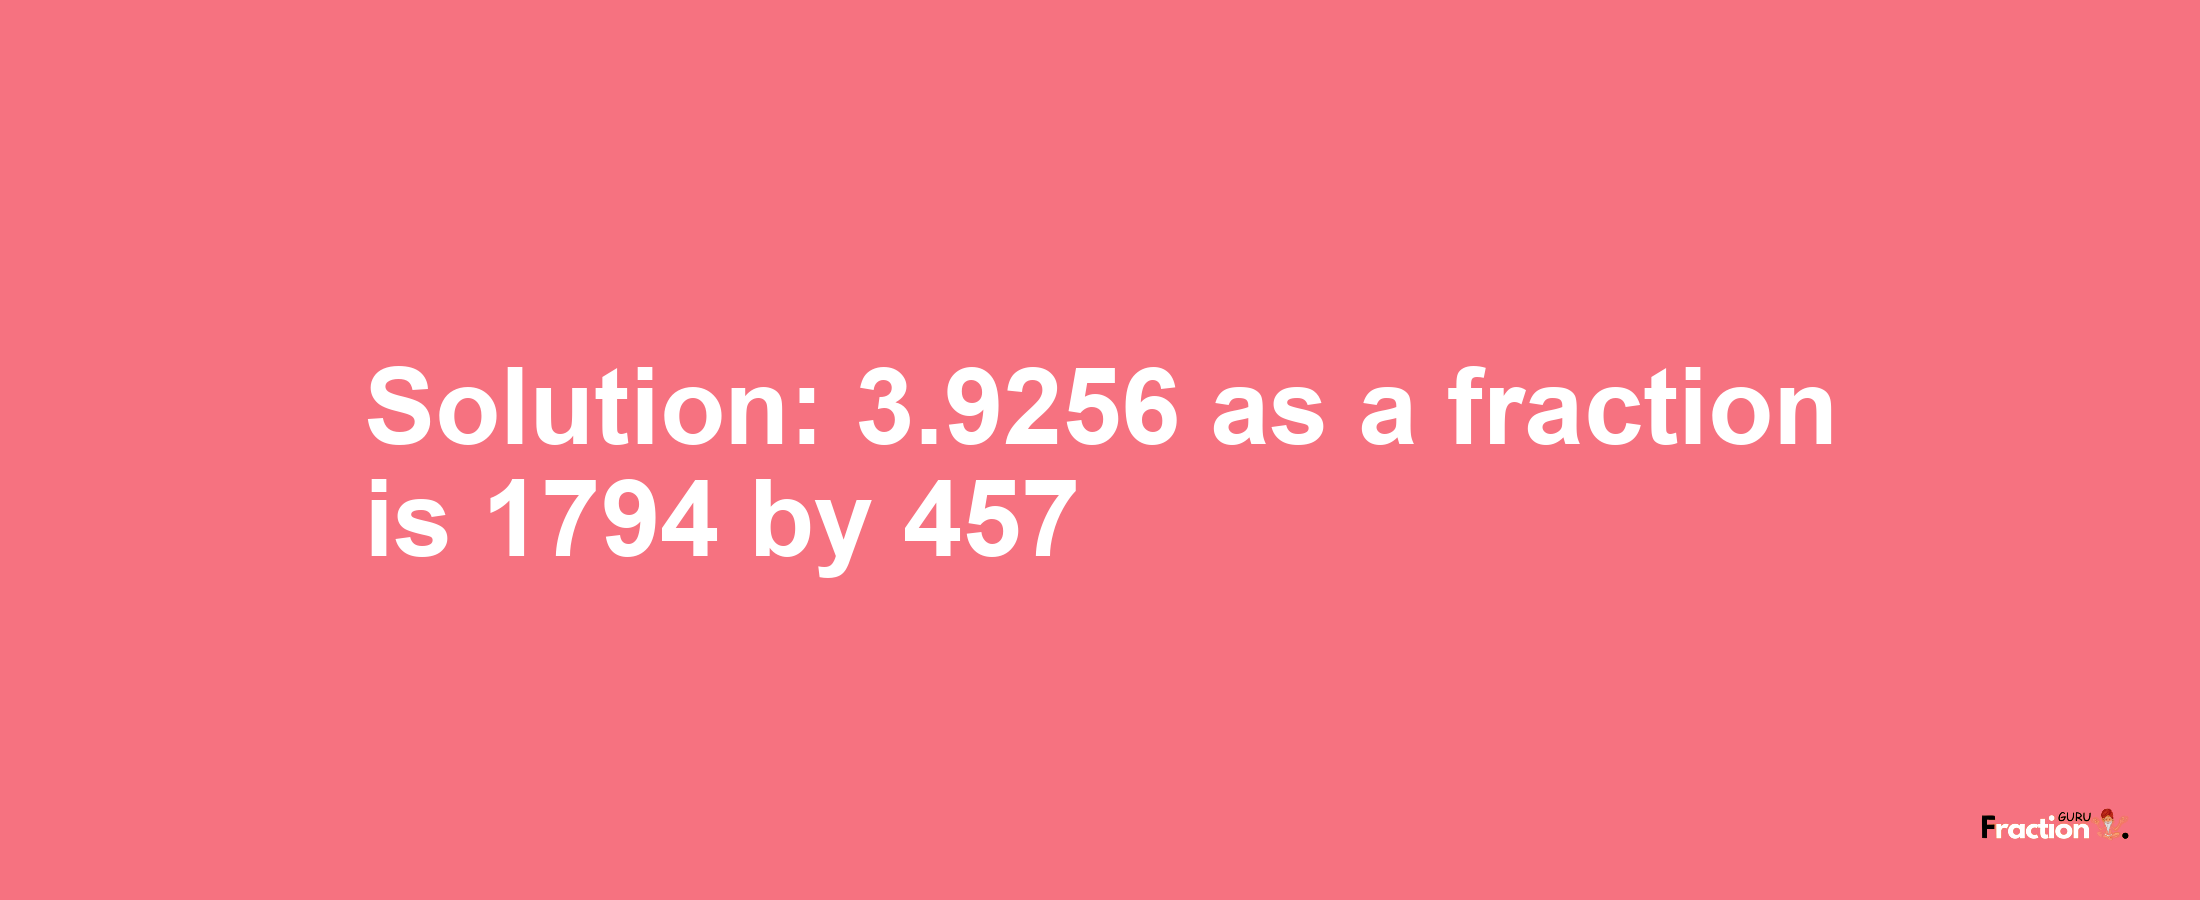 Solution:3.9256 as a fraction is 1794/457